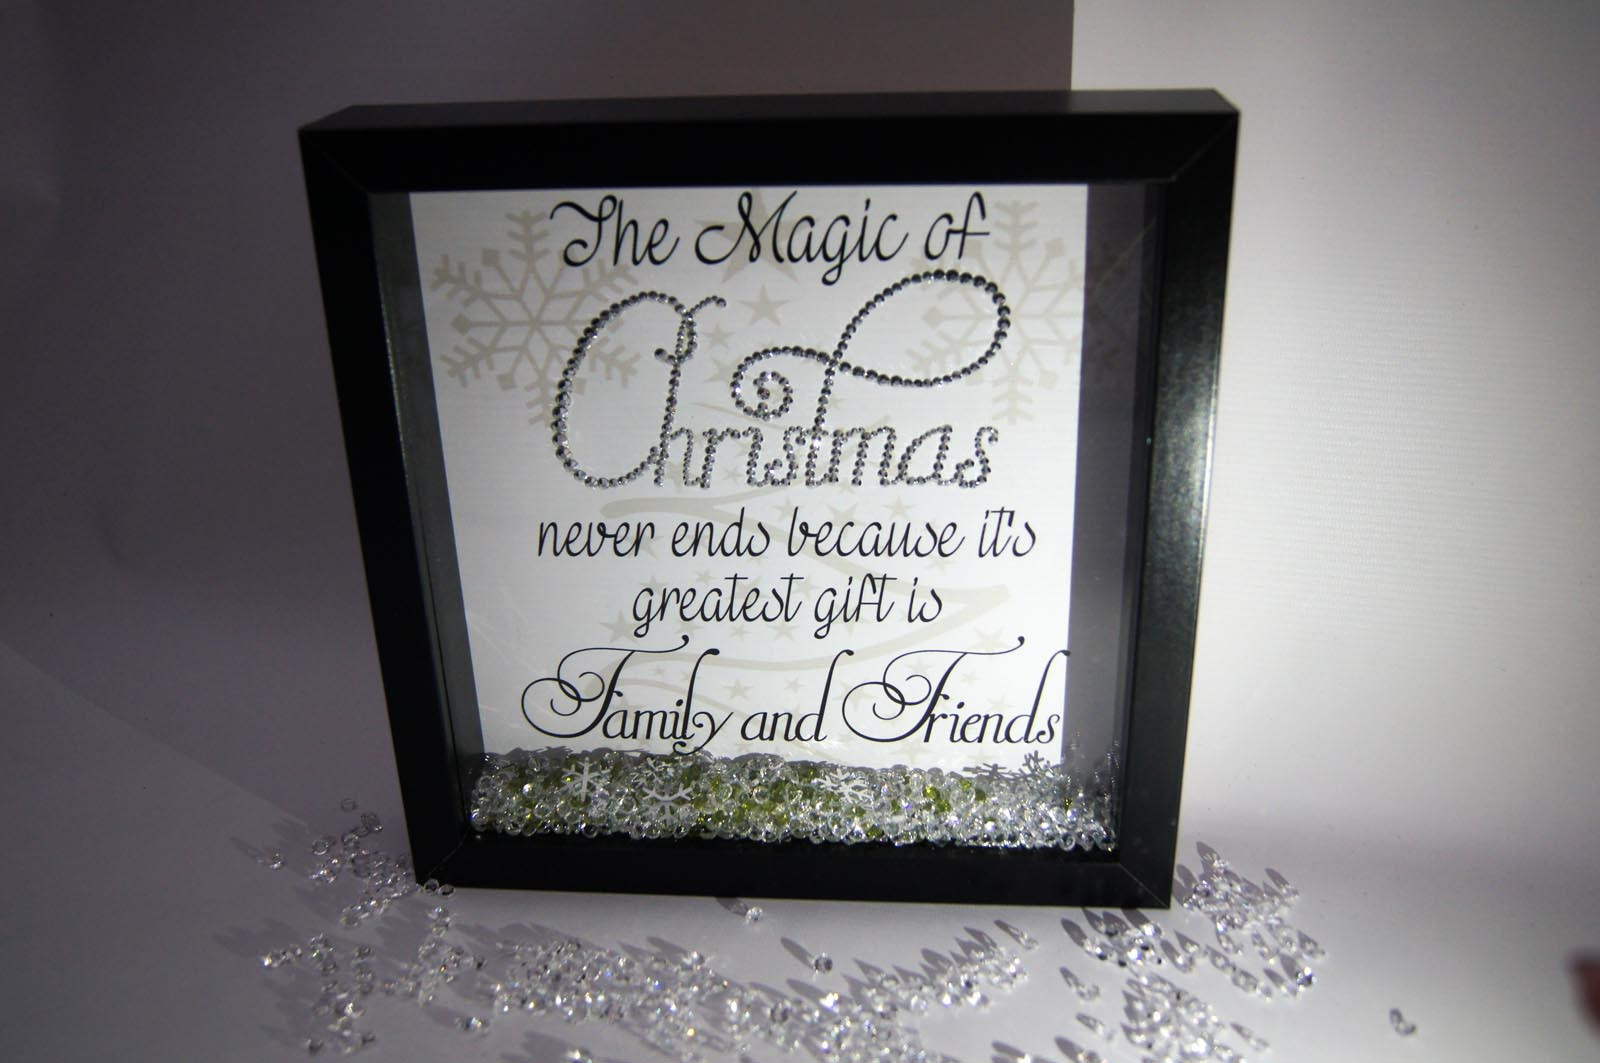 Picture Frames With Quotes About Family
 The Magic Christmas Family Sparkle Crystal Frame Word